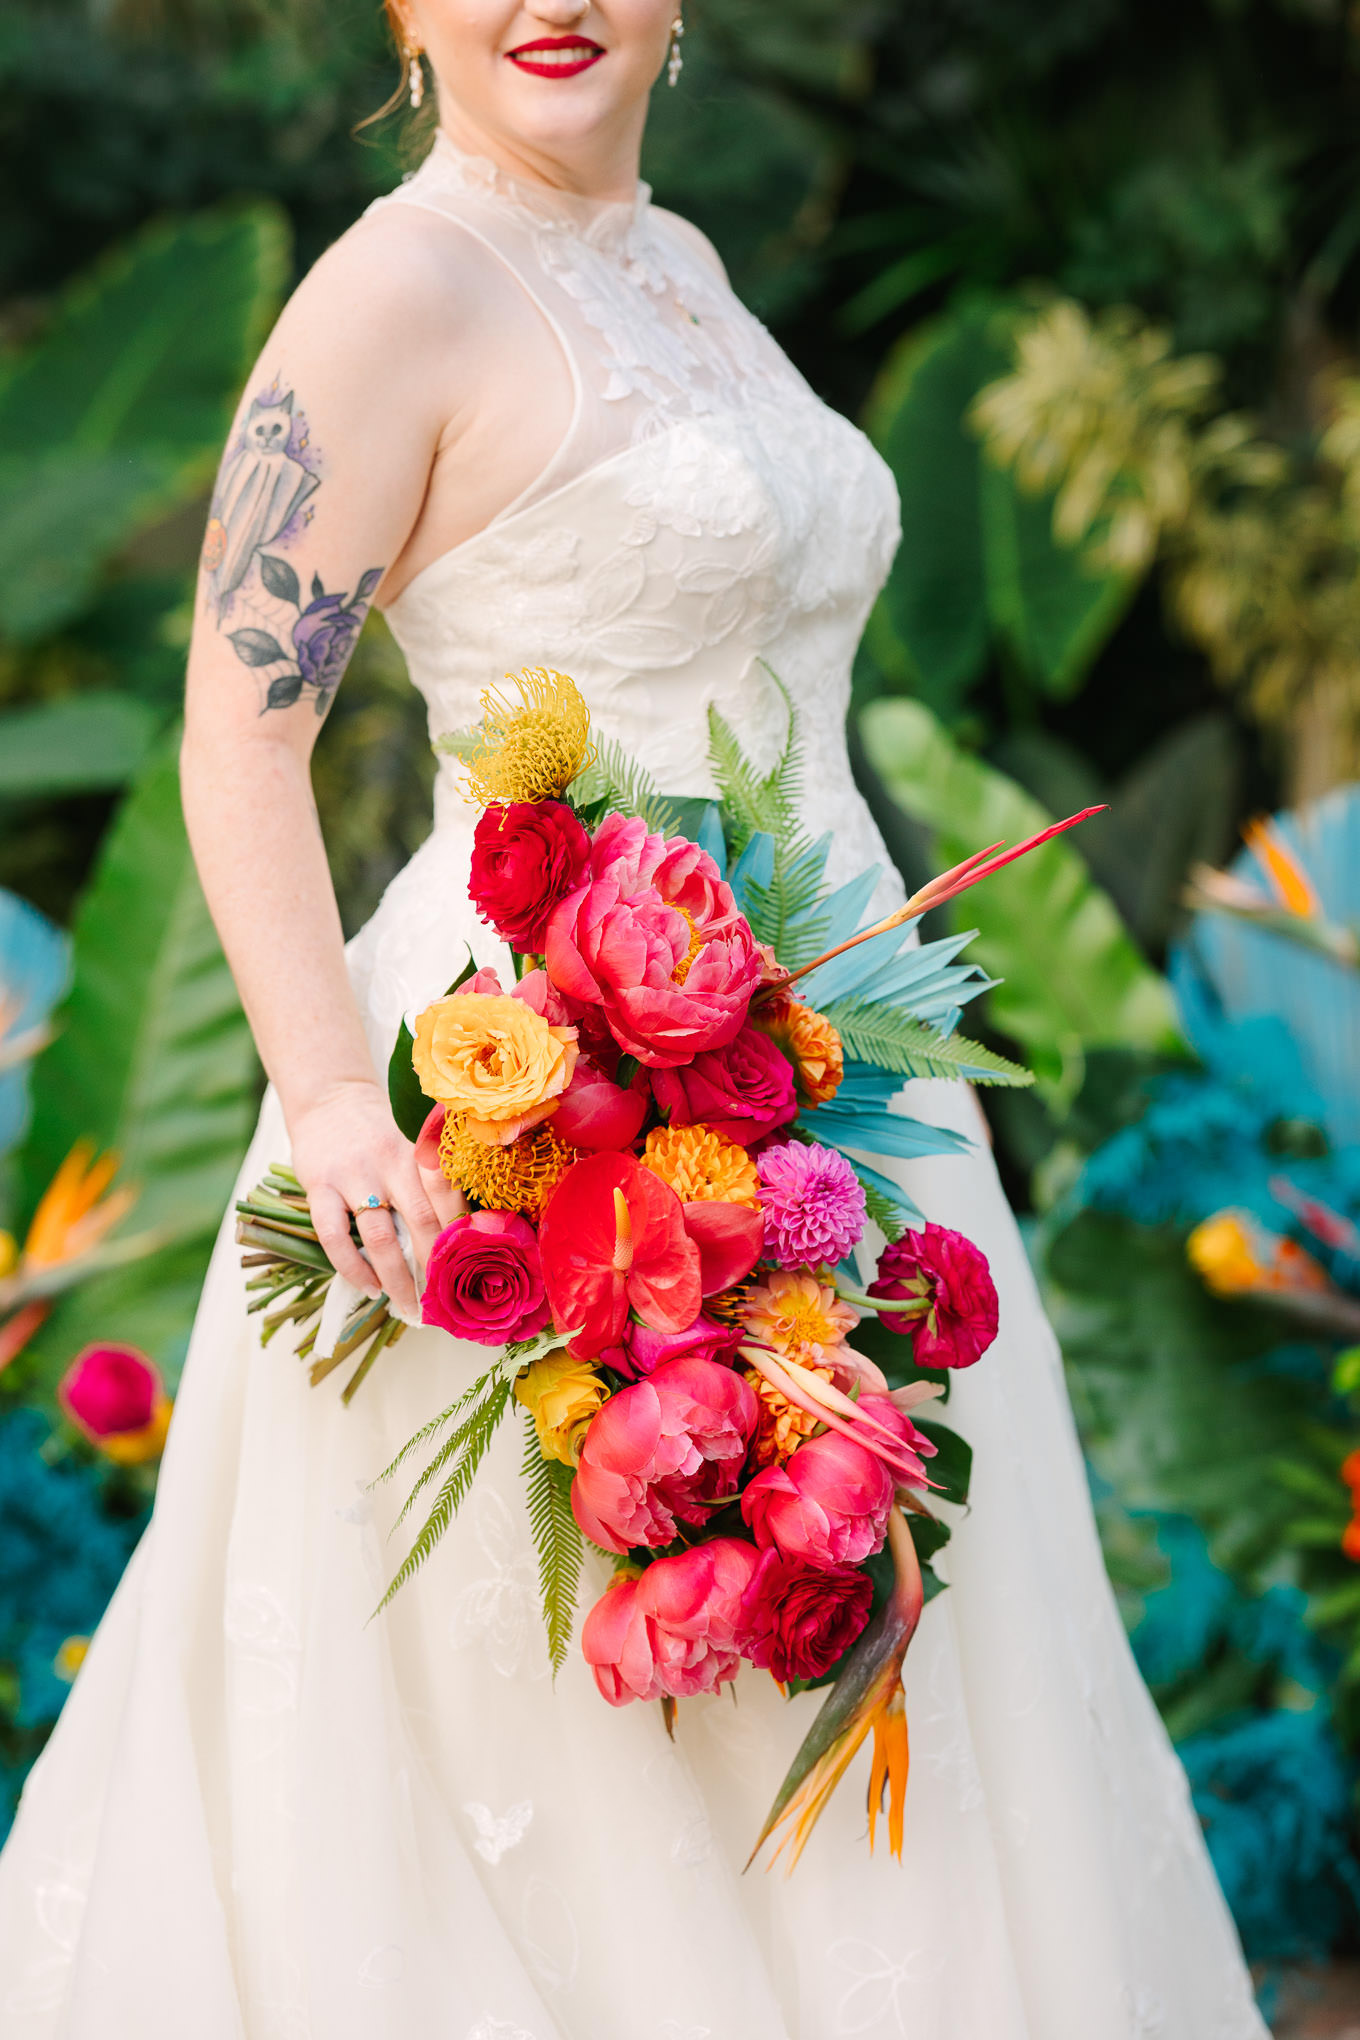 Downtown Los Angeles Valentine wedding | Wedding and elopement photography roundup | Los Angeles and Palm Springs  photographer | #losangeleswedding #palmspringswedding #elopementphotographer

Source: Mary Costa Photography | Los Angeles